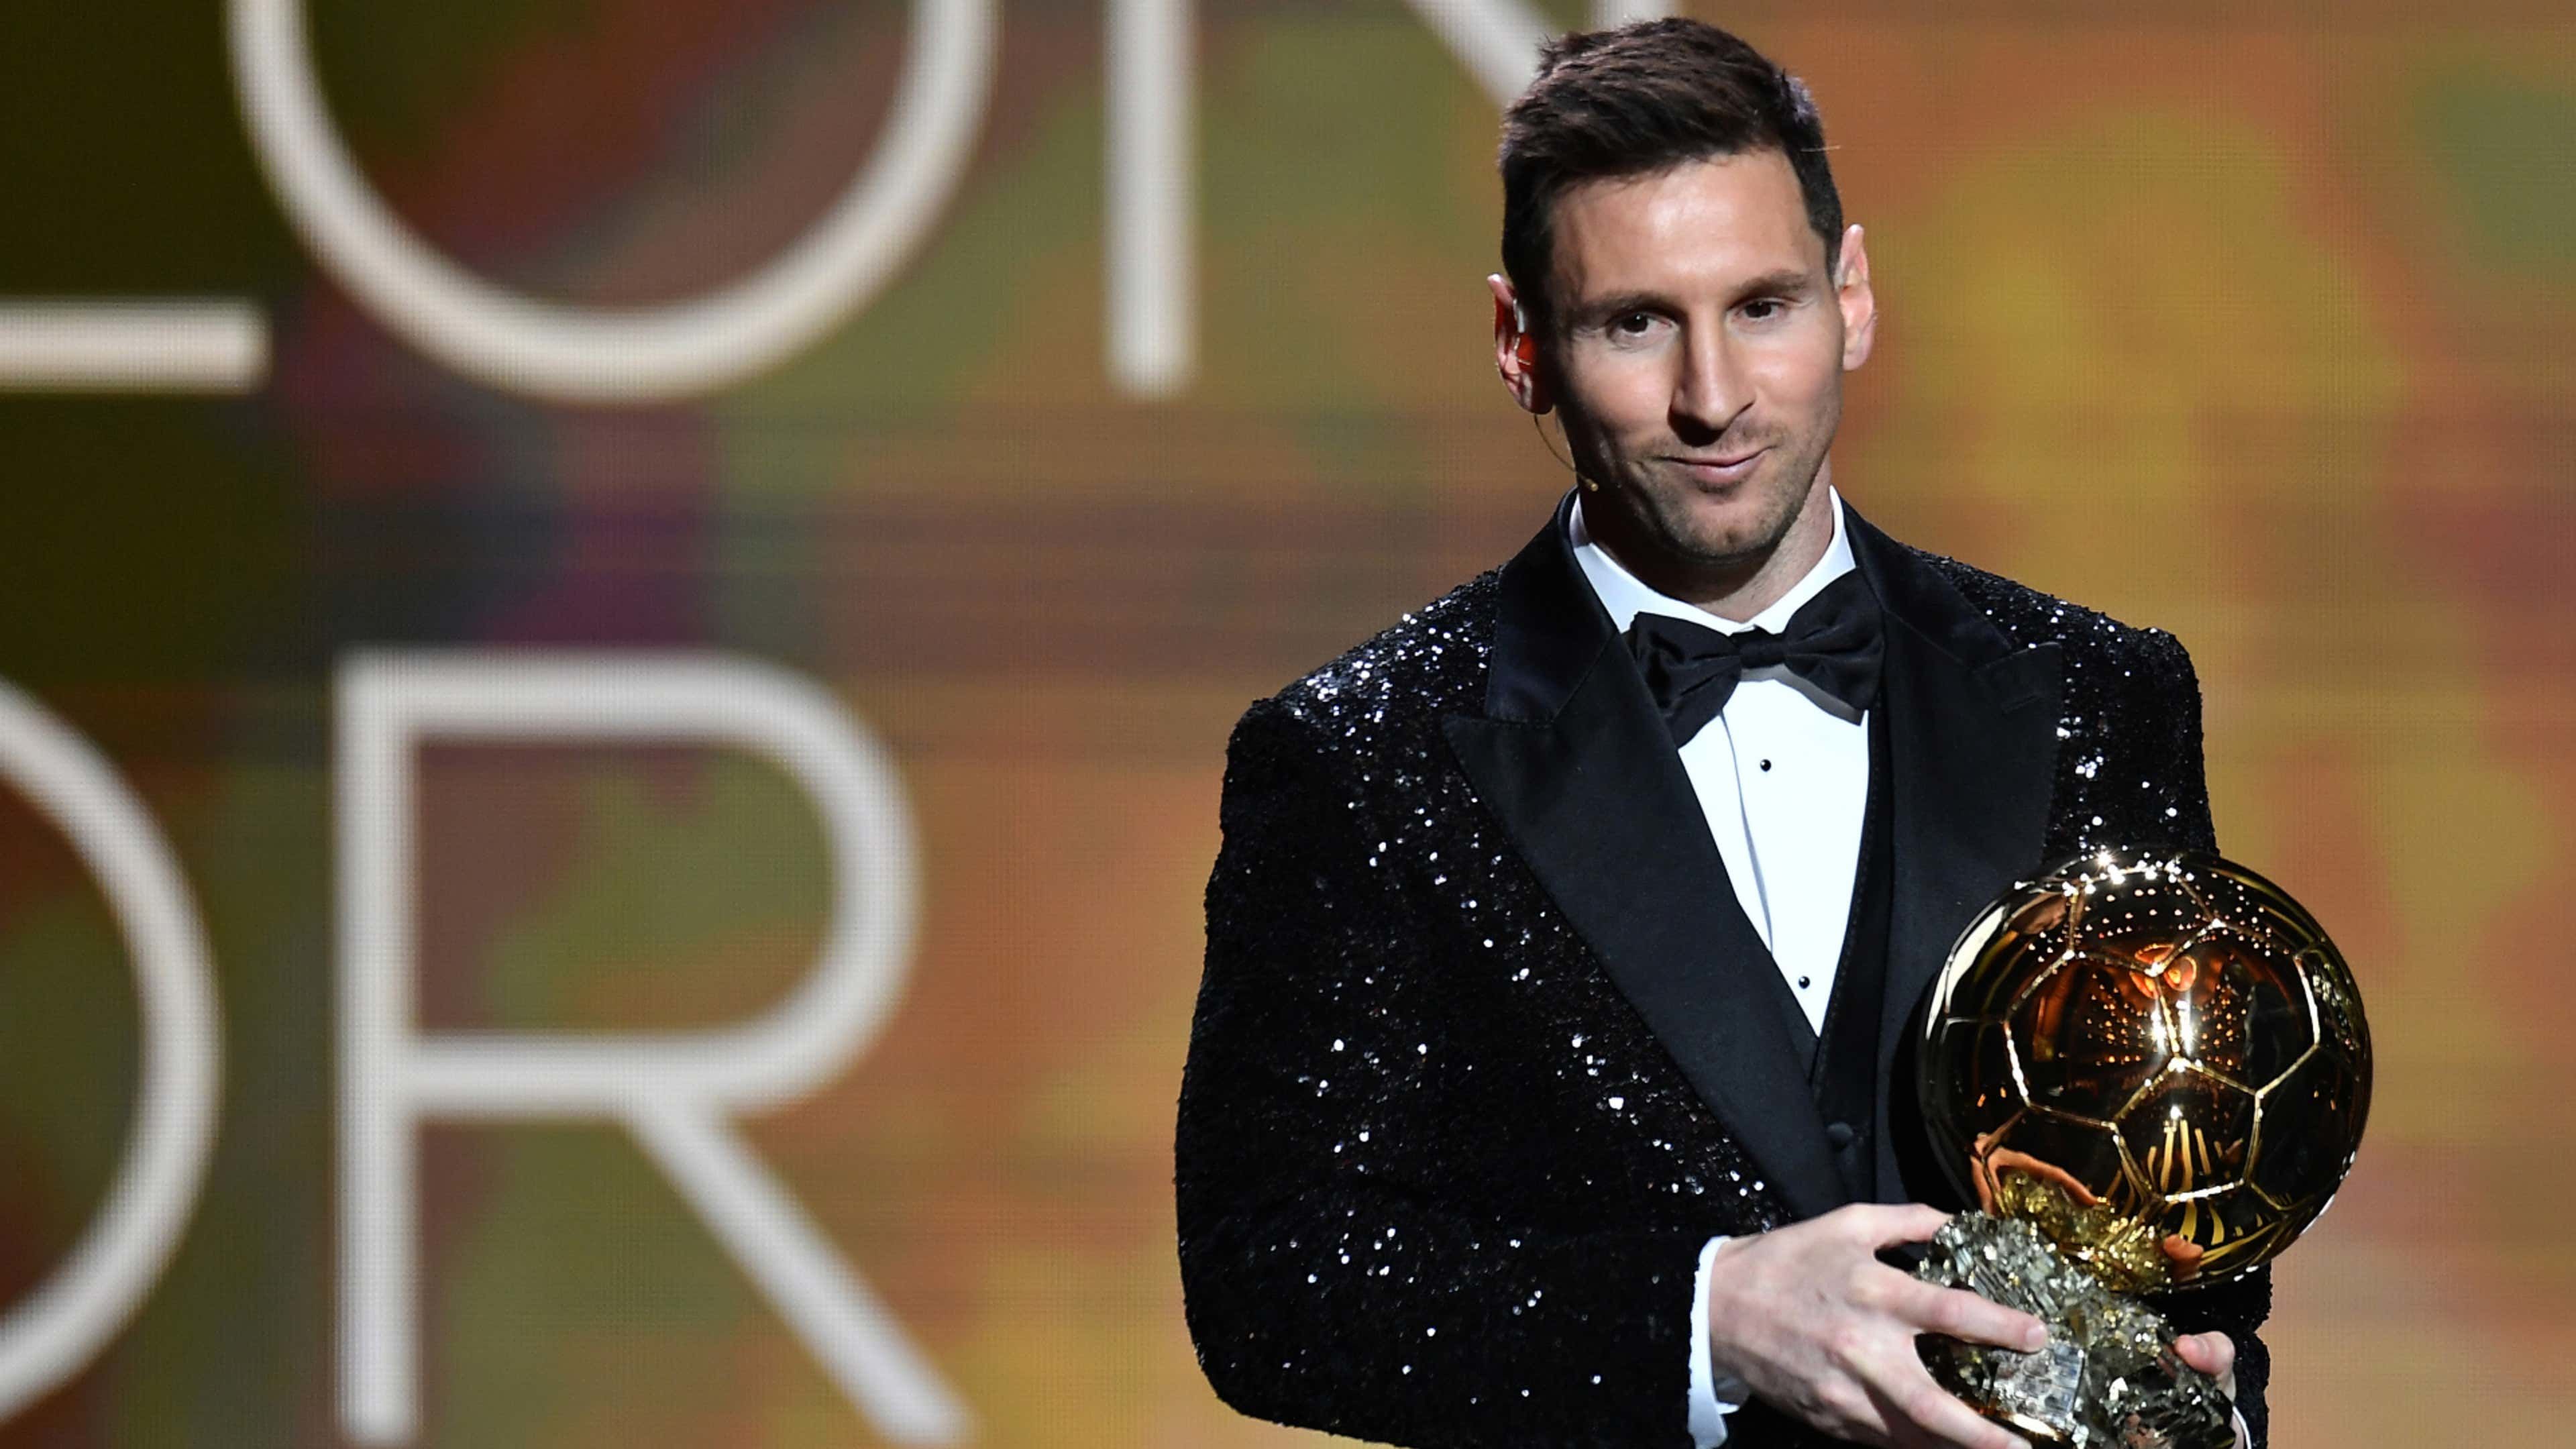 Messi Was Informed In Advance About Being Awarded Ballon D'Or